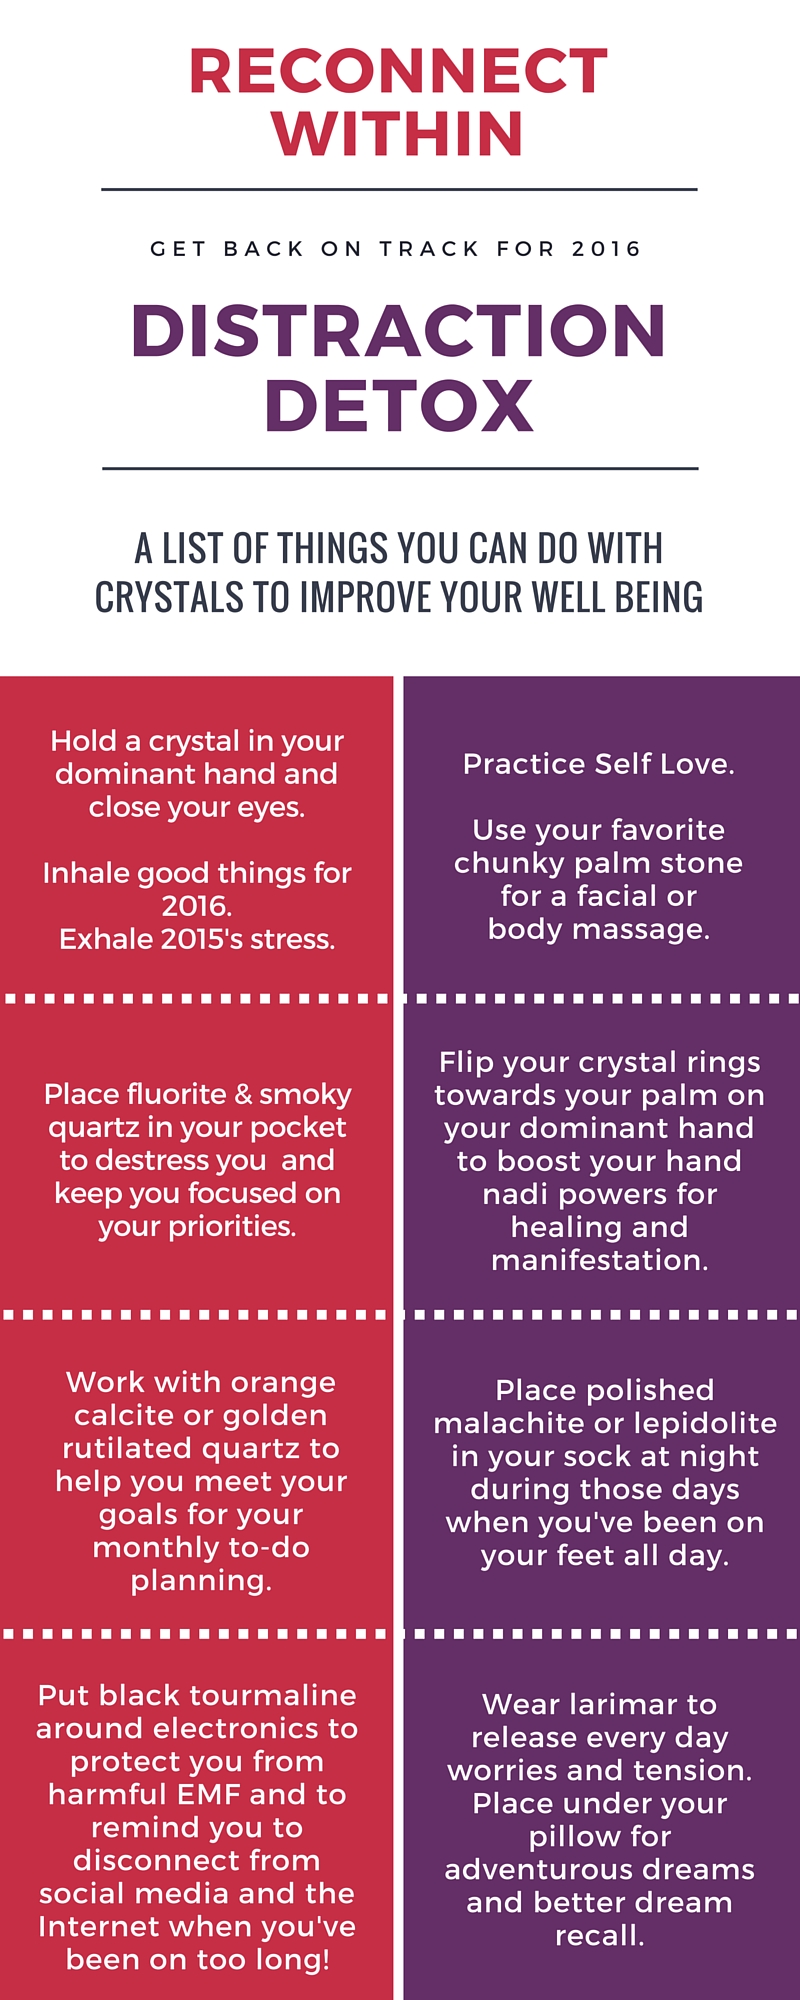 Reconnect within with crystal healing - Get Back On Track for 2016 - Distraction Detox - A list of things you can do with crystals to improve your well being. Hold a crystal in your dominant hand and close your eyes. Inhale good things for 2016. Exhale 2015's stress. Practice Self Love. Use your favorite chunky palm stone for a facial or body massage. Place fluorite & smoky quartz in your pocket to destress you and keep you focused on your priorities. Flip your crystal rings towards your palm on your dominant hand to boost your hand nadi powers for healing and manifestation. Work with orange calcite and golden rutilated quartz to help you meet your goals for your monthly to-do planning. Place polished malachite or lepidolite in your sock at night during those days when you've been on your feet all day. Put black tourmaline around electronics to protect you from harmful EMF and to remind you to disconnect from social media and the Internet when you've been on too long! Wear larimar to release every day worries and tension. Place under your pillow for adventurous dreams and better dream recall.